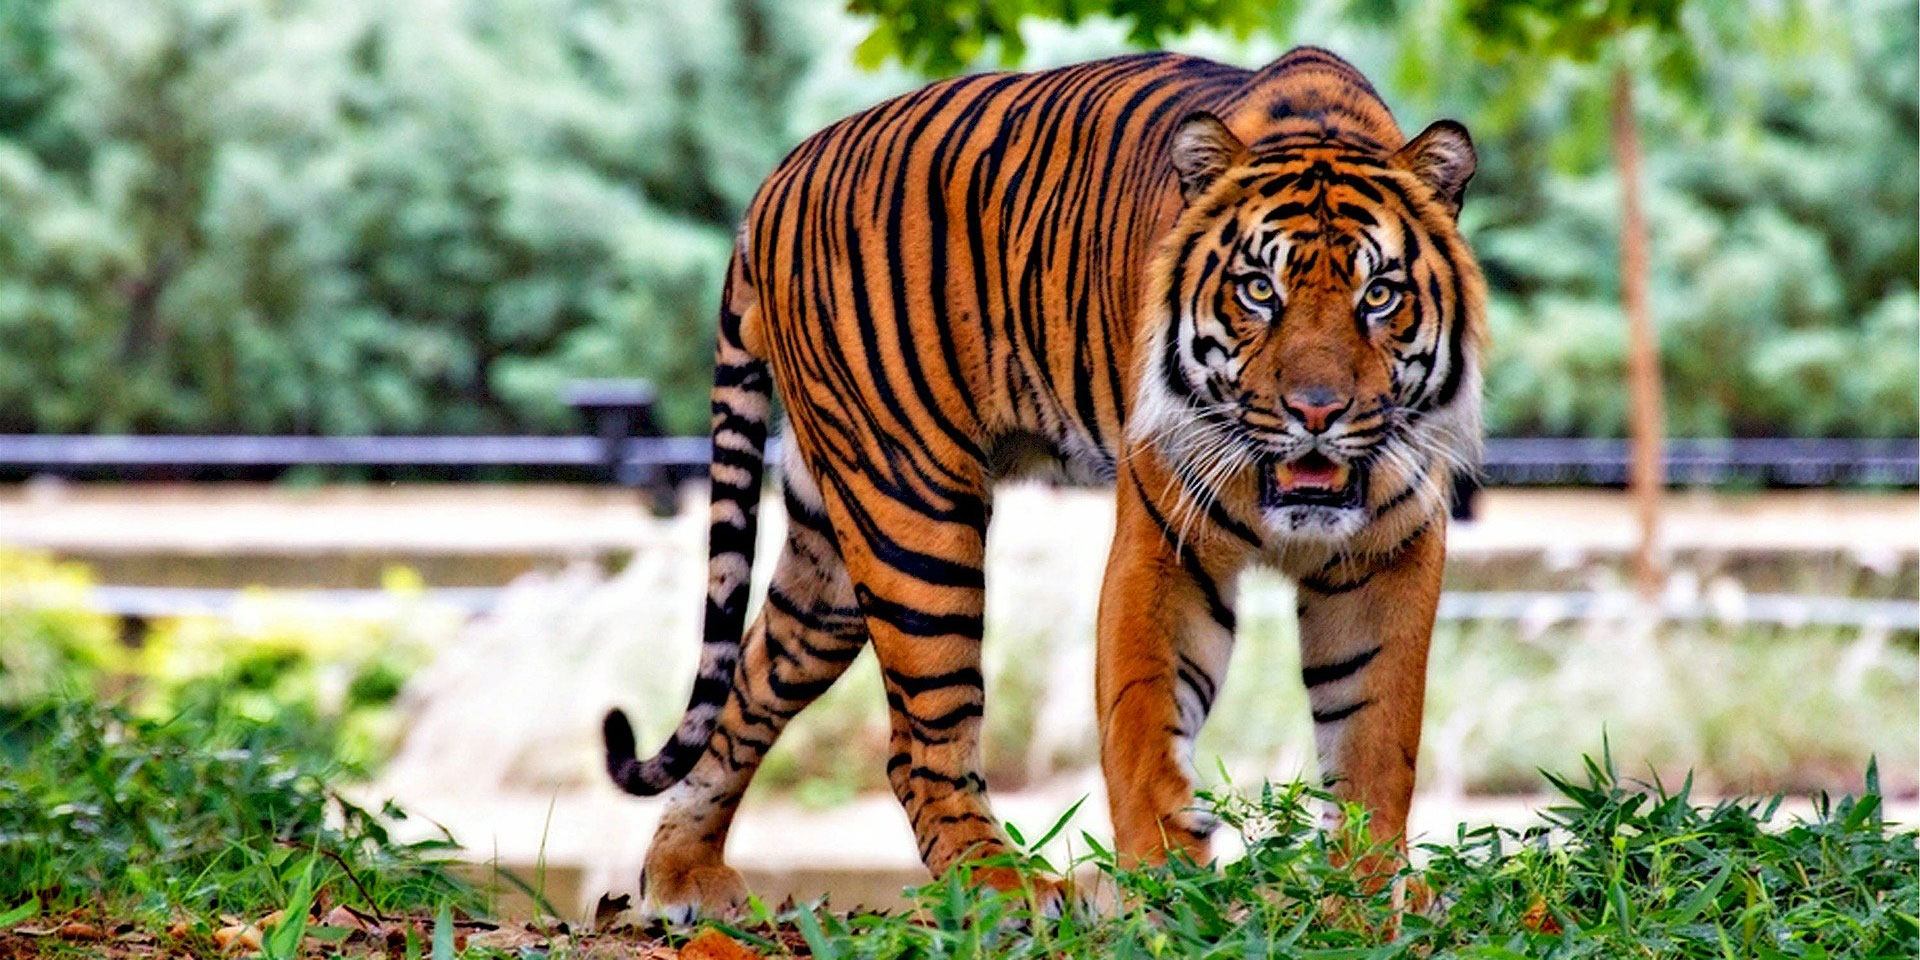 Tiger standing, looking towards the camera